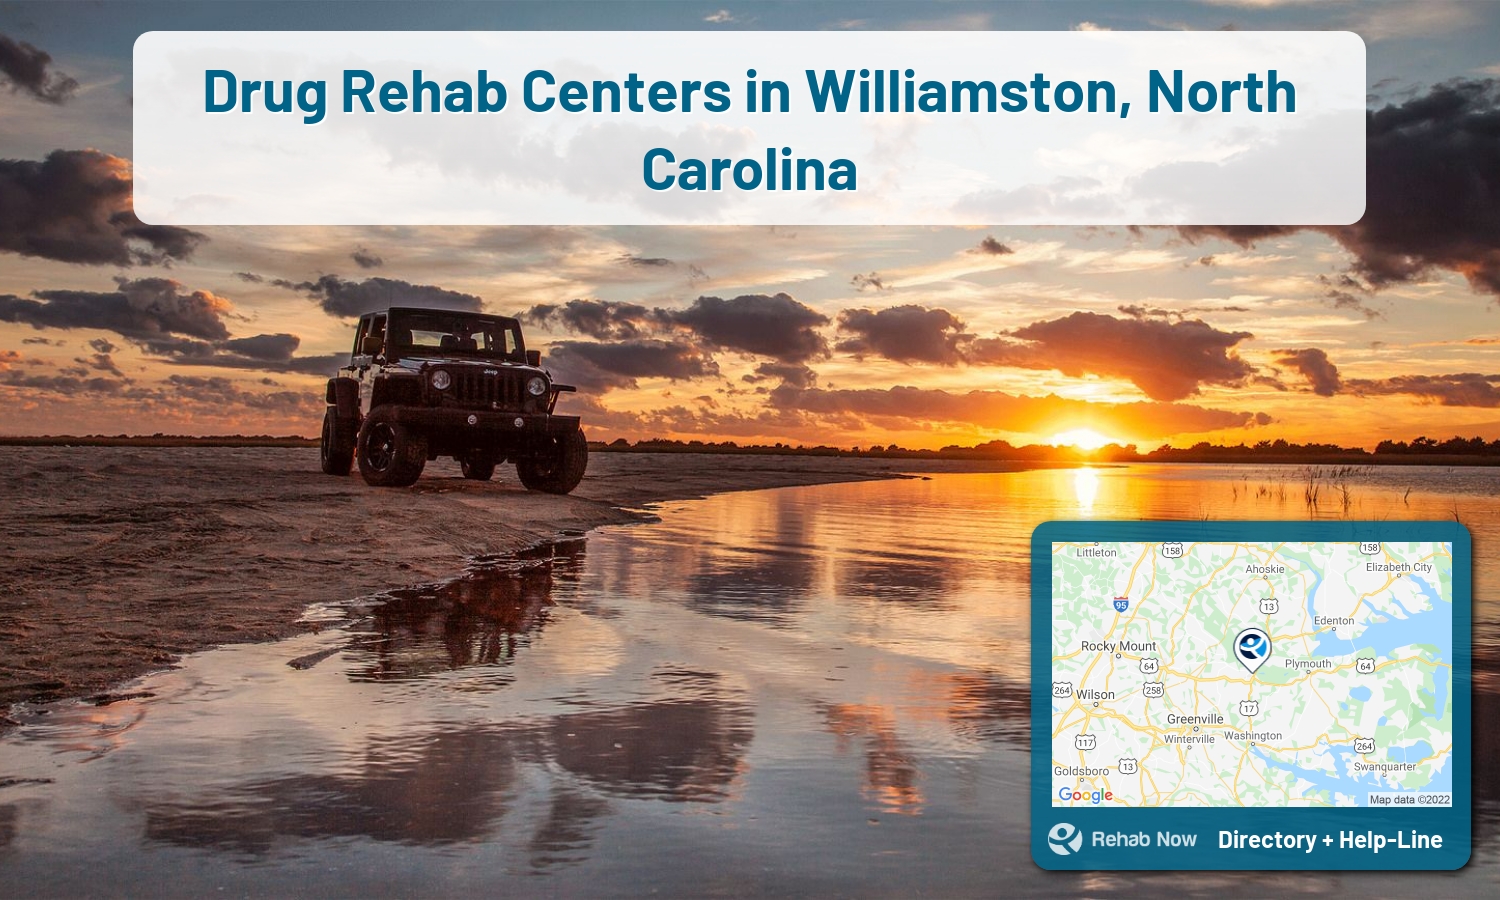 List of alcohol and drug treatment centers near you in Williamston, North Carolina. Research certifications, programs, methods, pricing, and more.